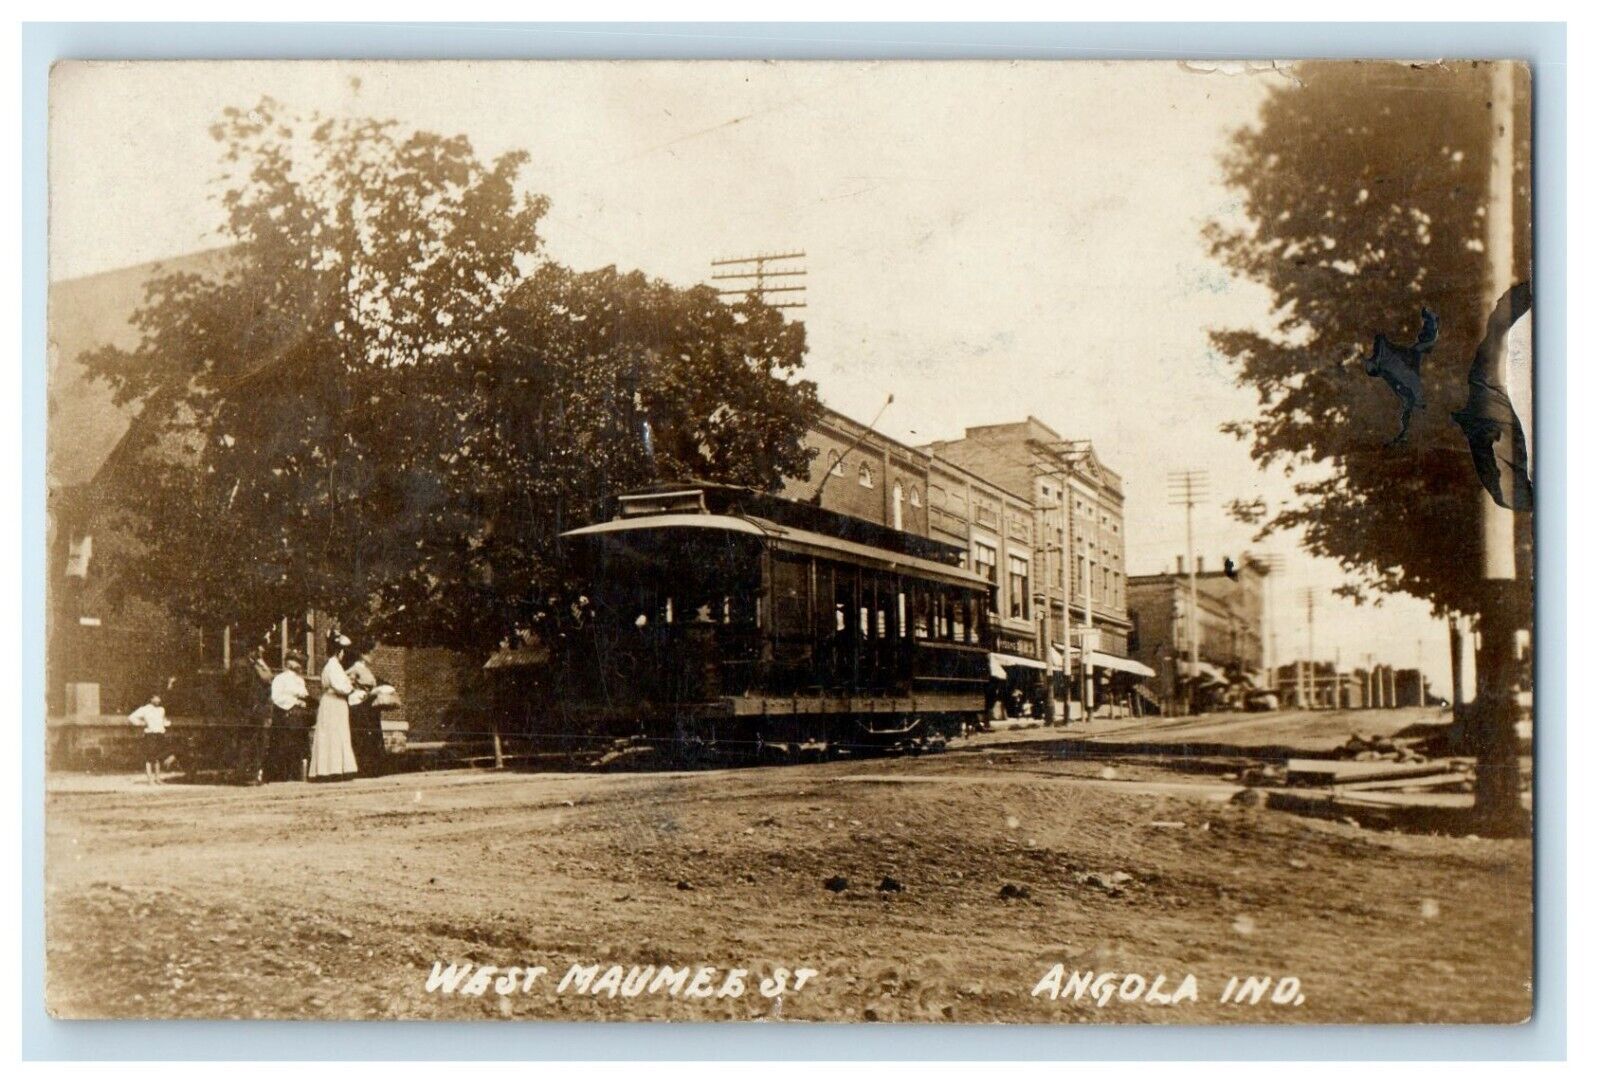 1909 West Maume St. Angola IN, Street Car Trolley Candid RPPC Photo Postcard